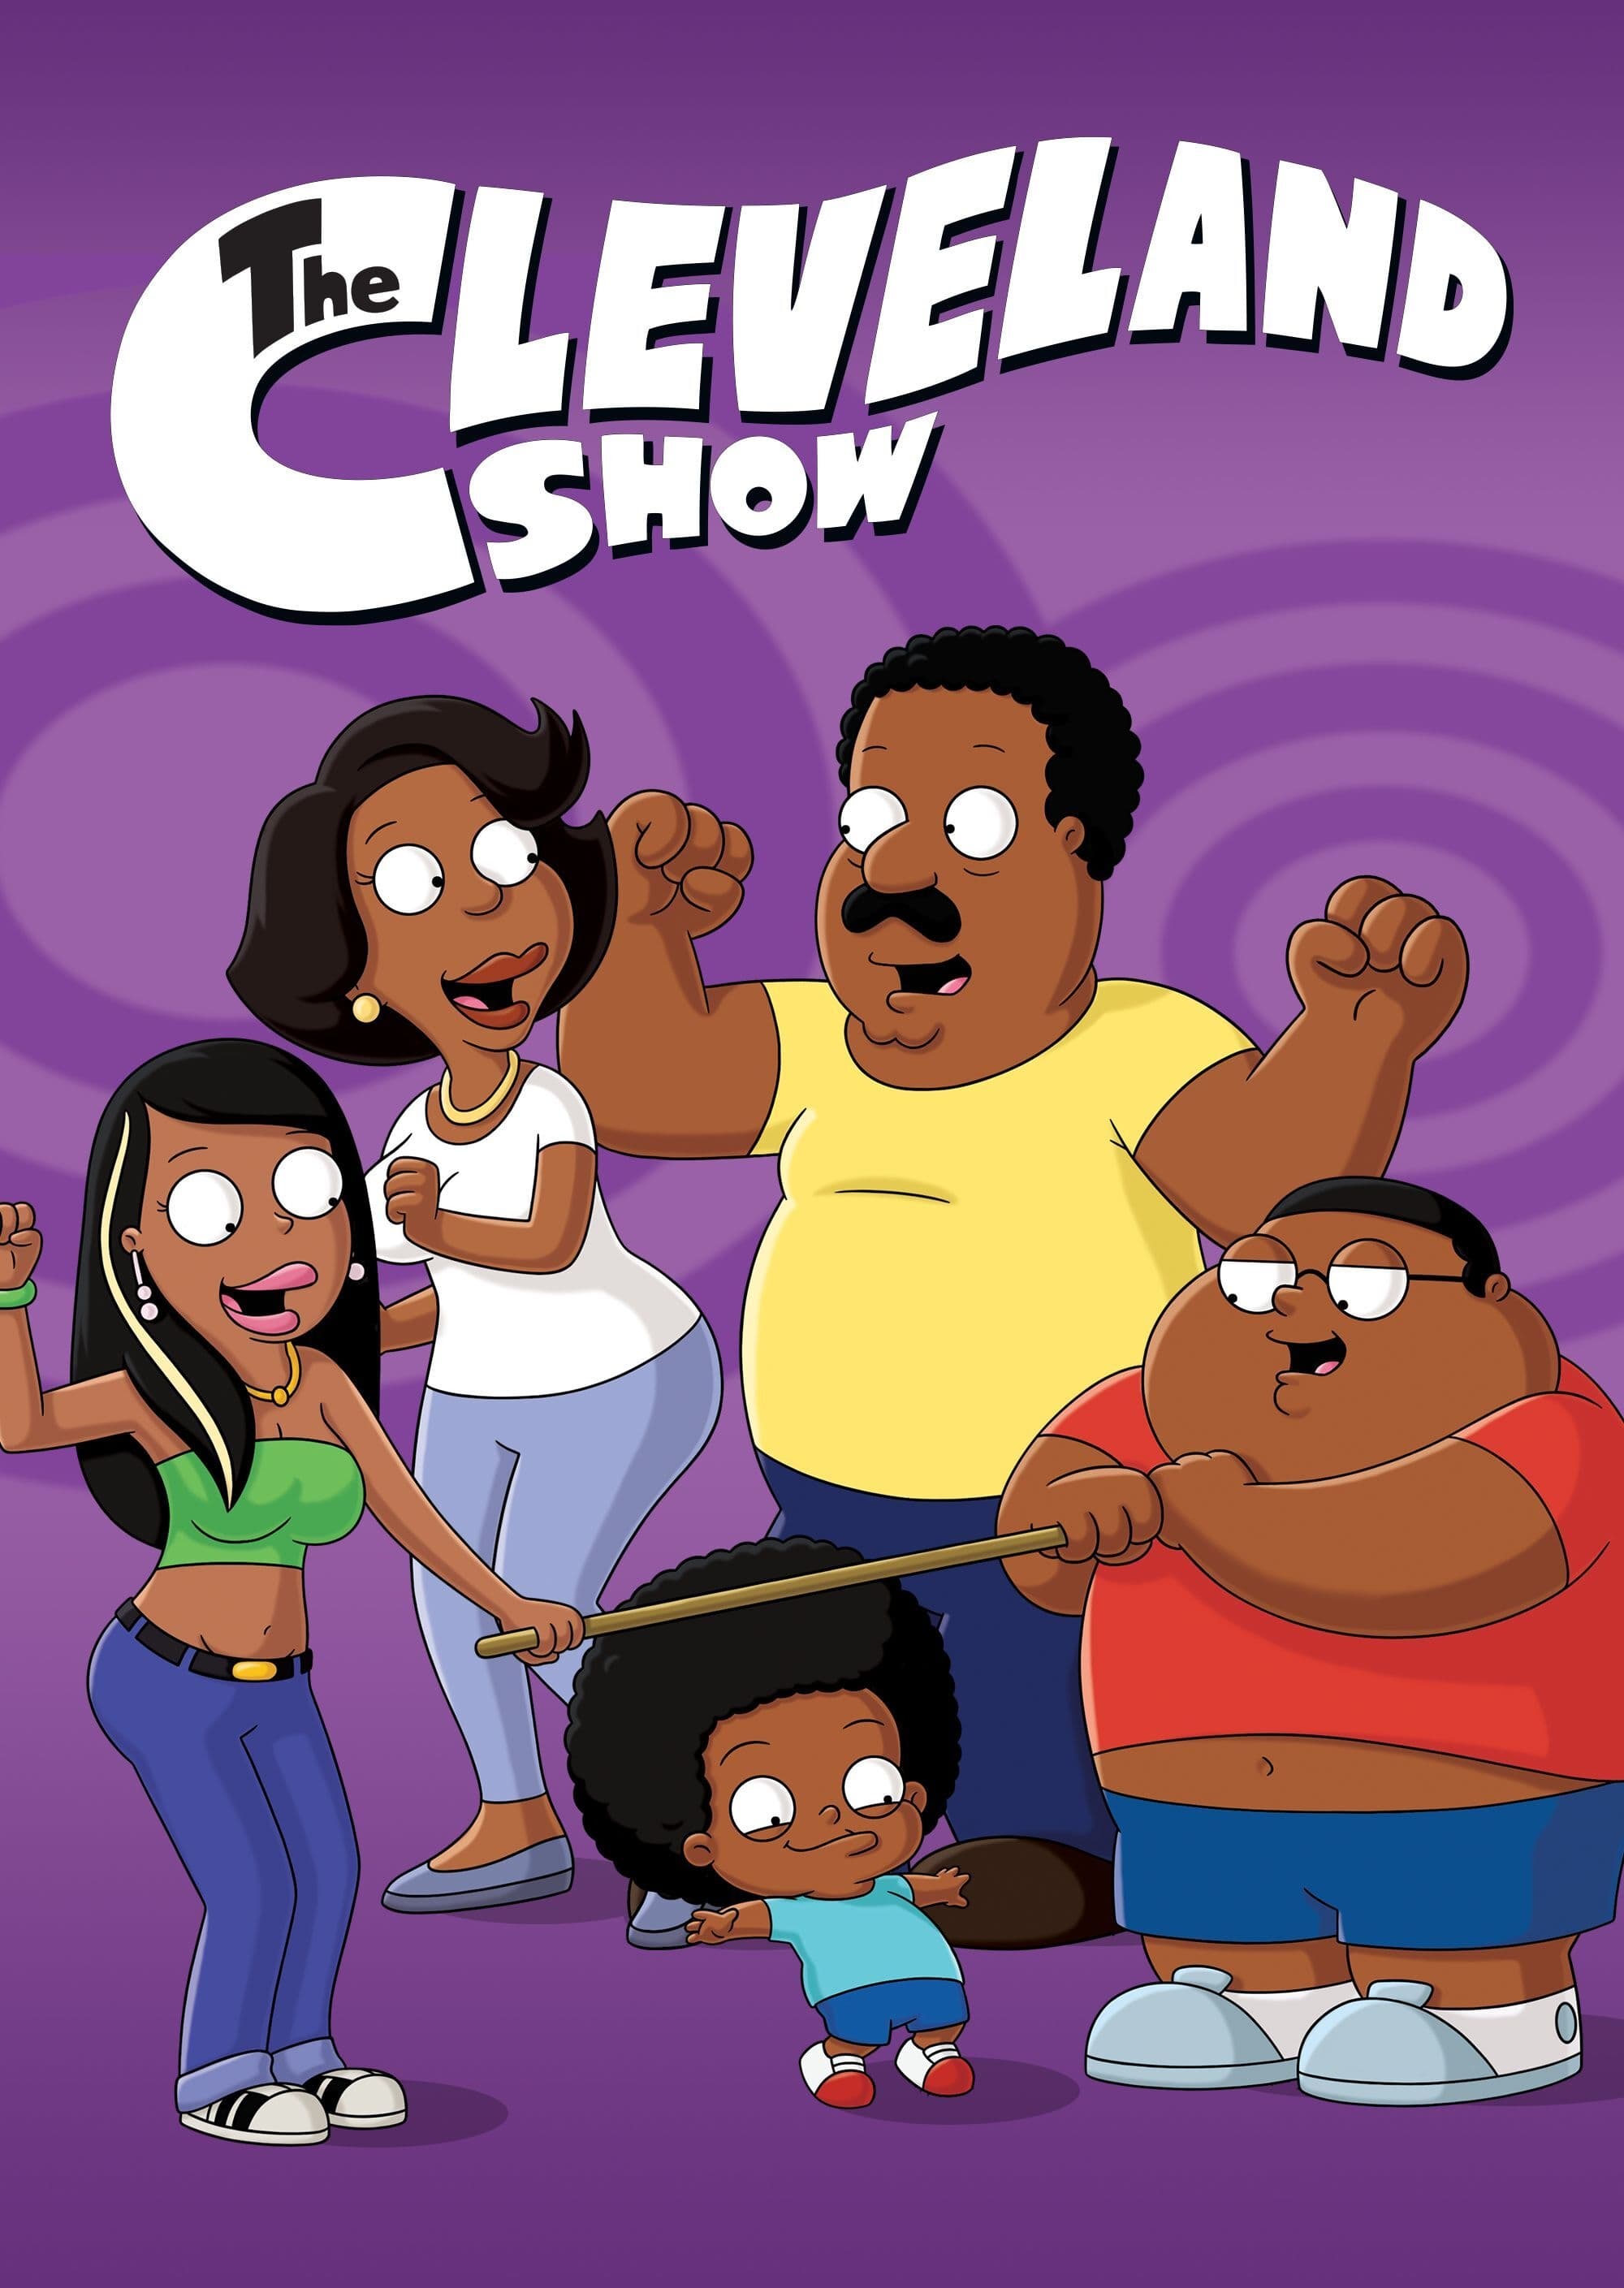 The Cleveland Show TV Shows About Blended Family